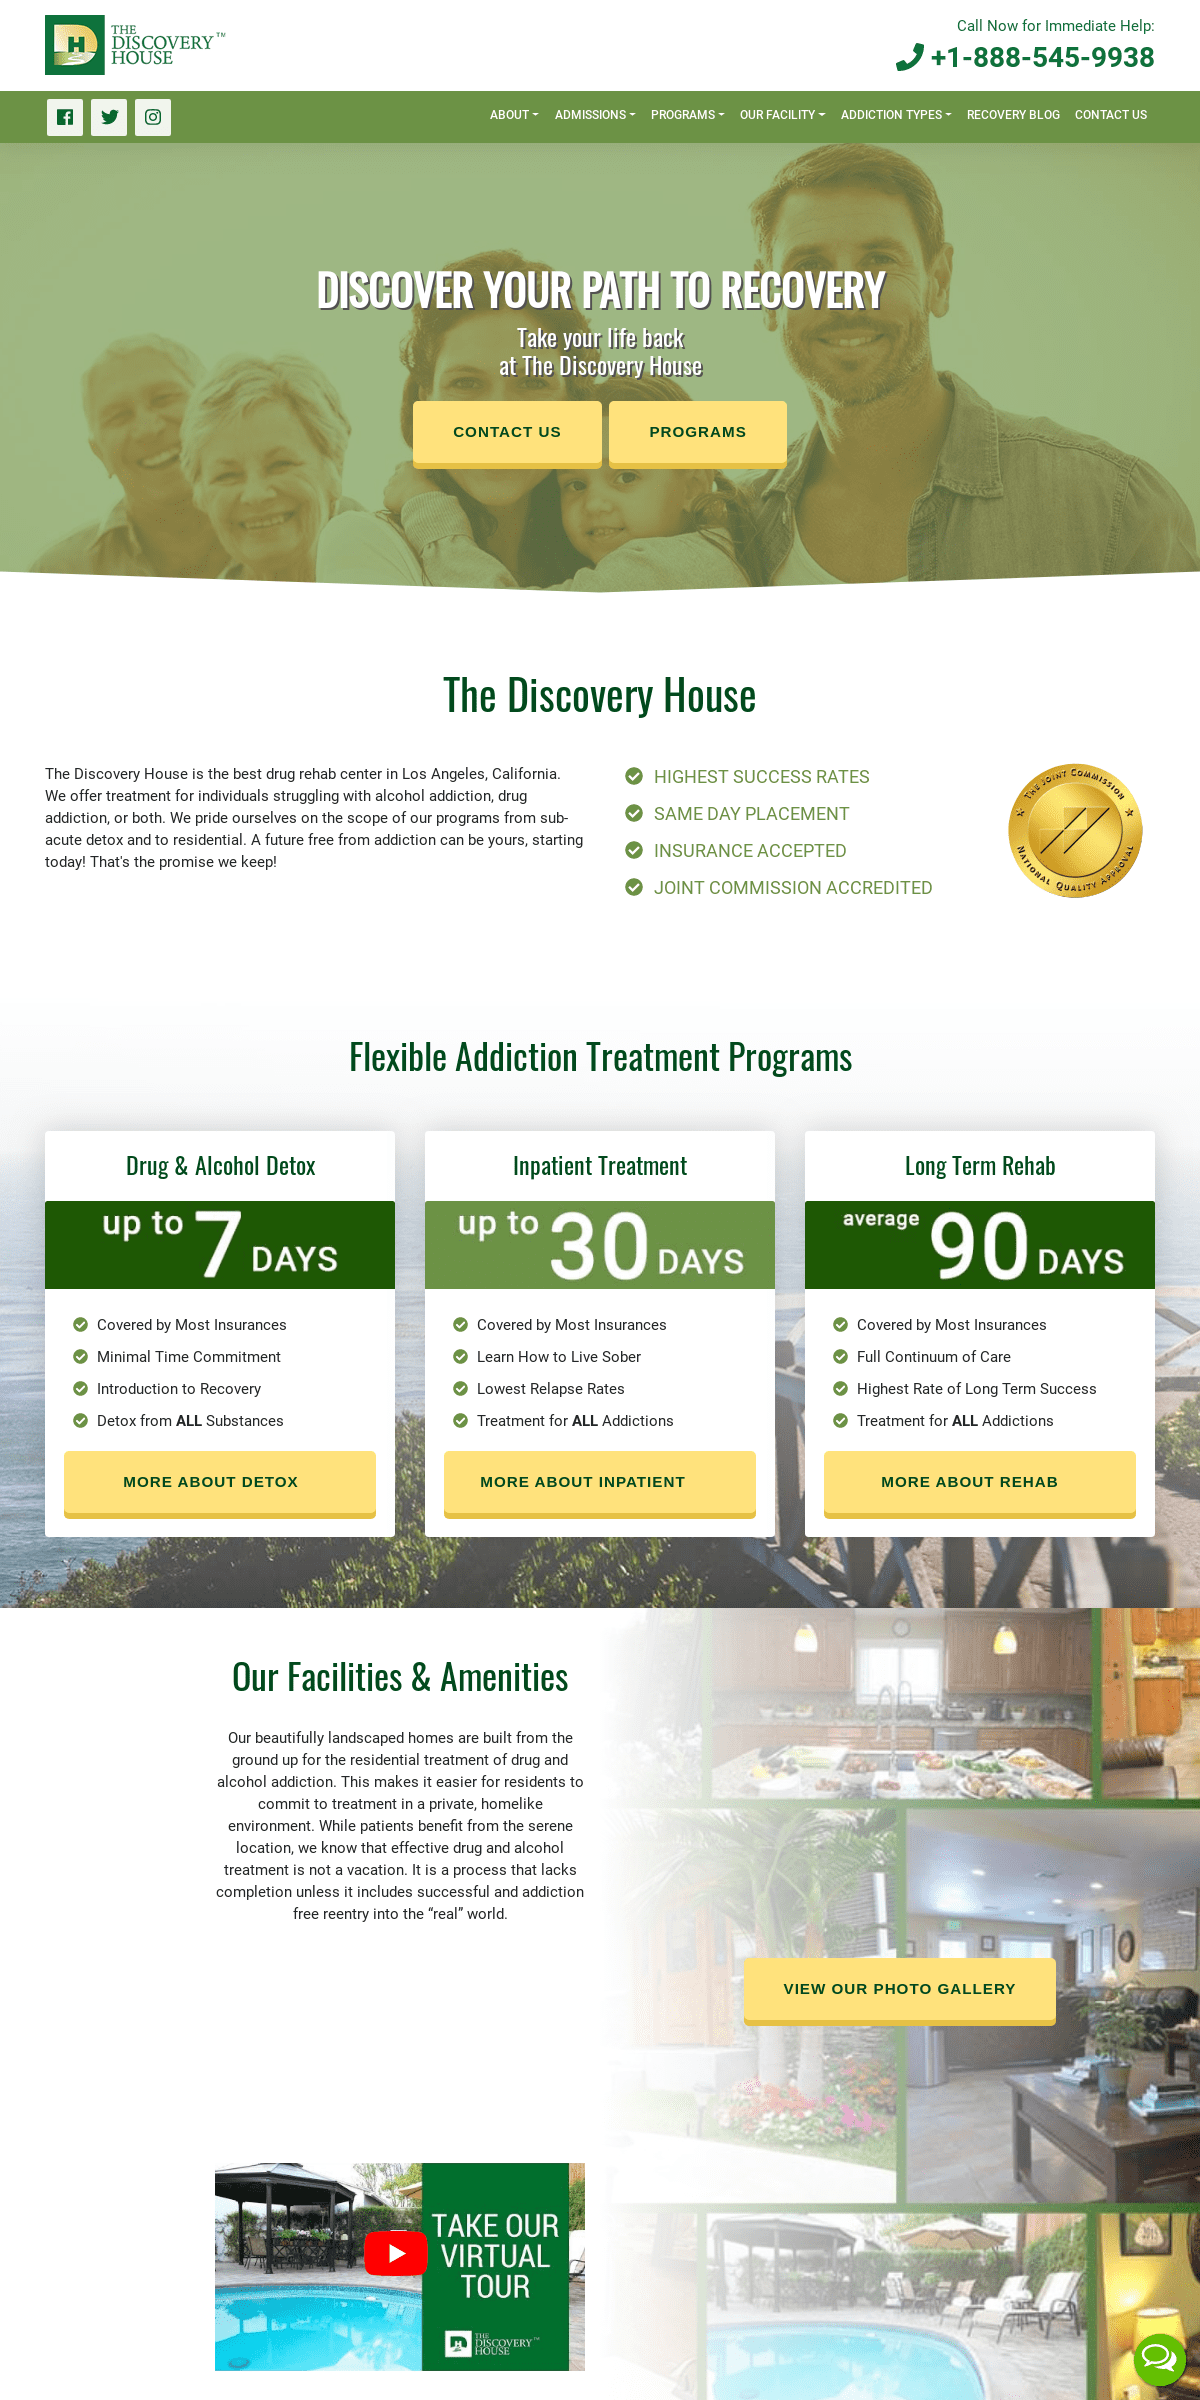 A complete backup of thediscoveryhouse.com